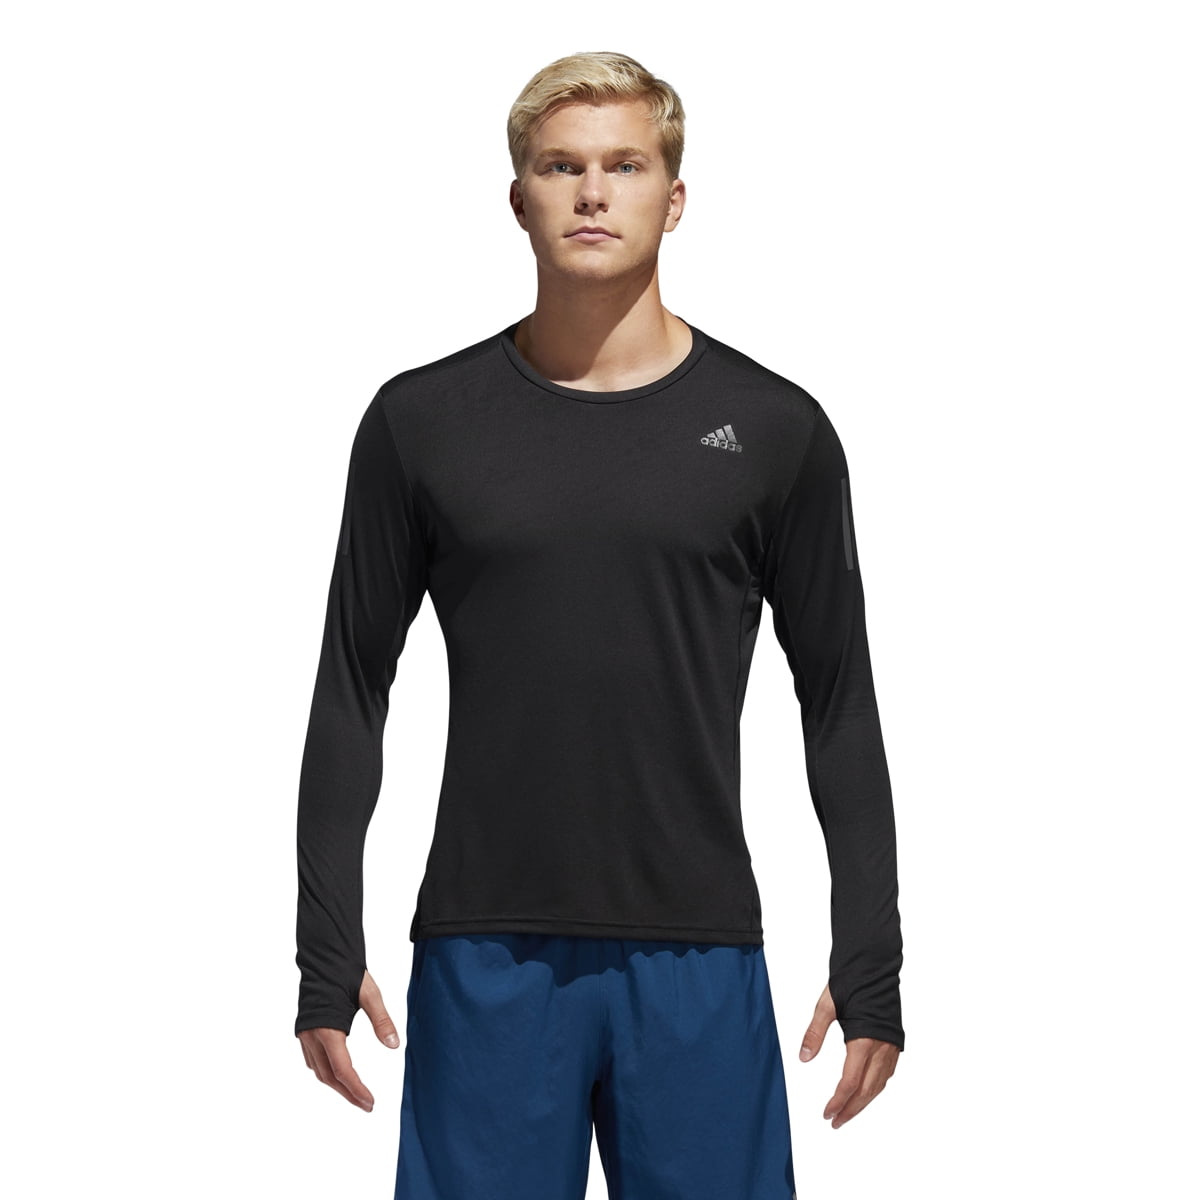 søskende næse Manners Adidas Own The Run Long Sleeve Tee Adidas - Ships Directly From Adidas -  Walmart.com